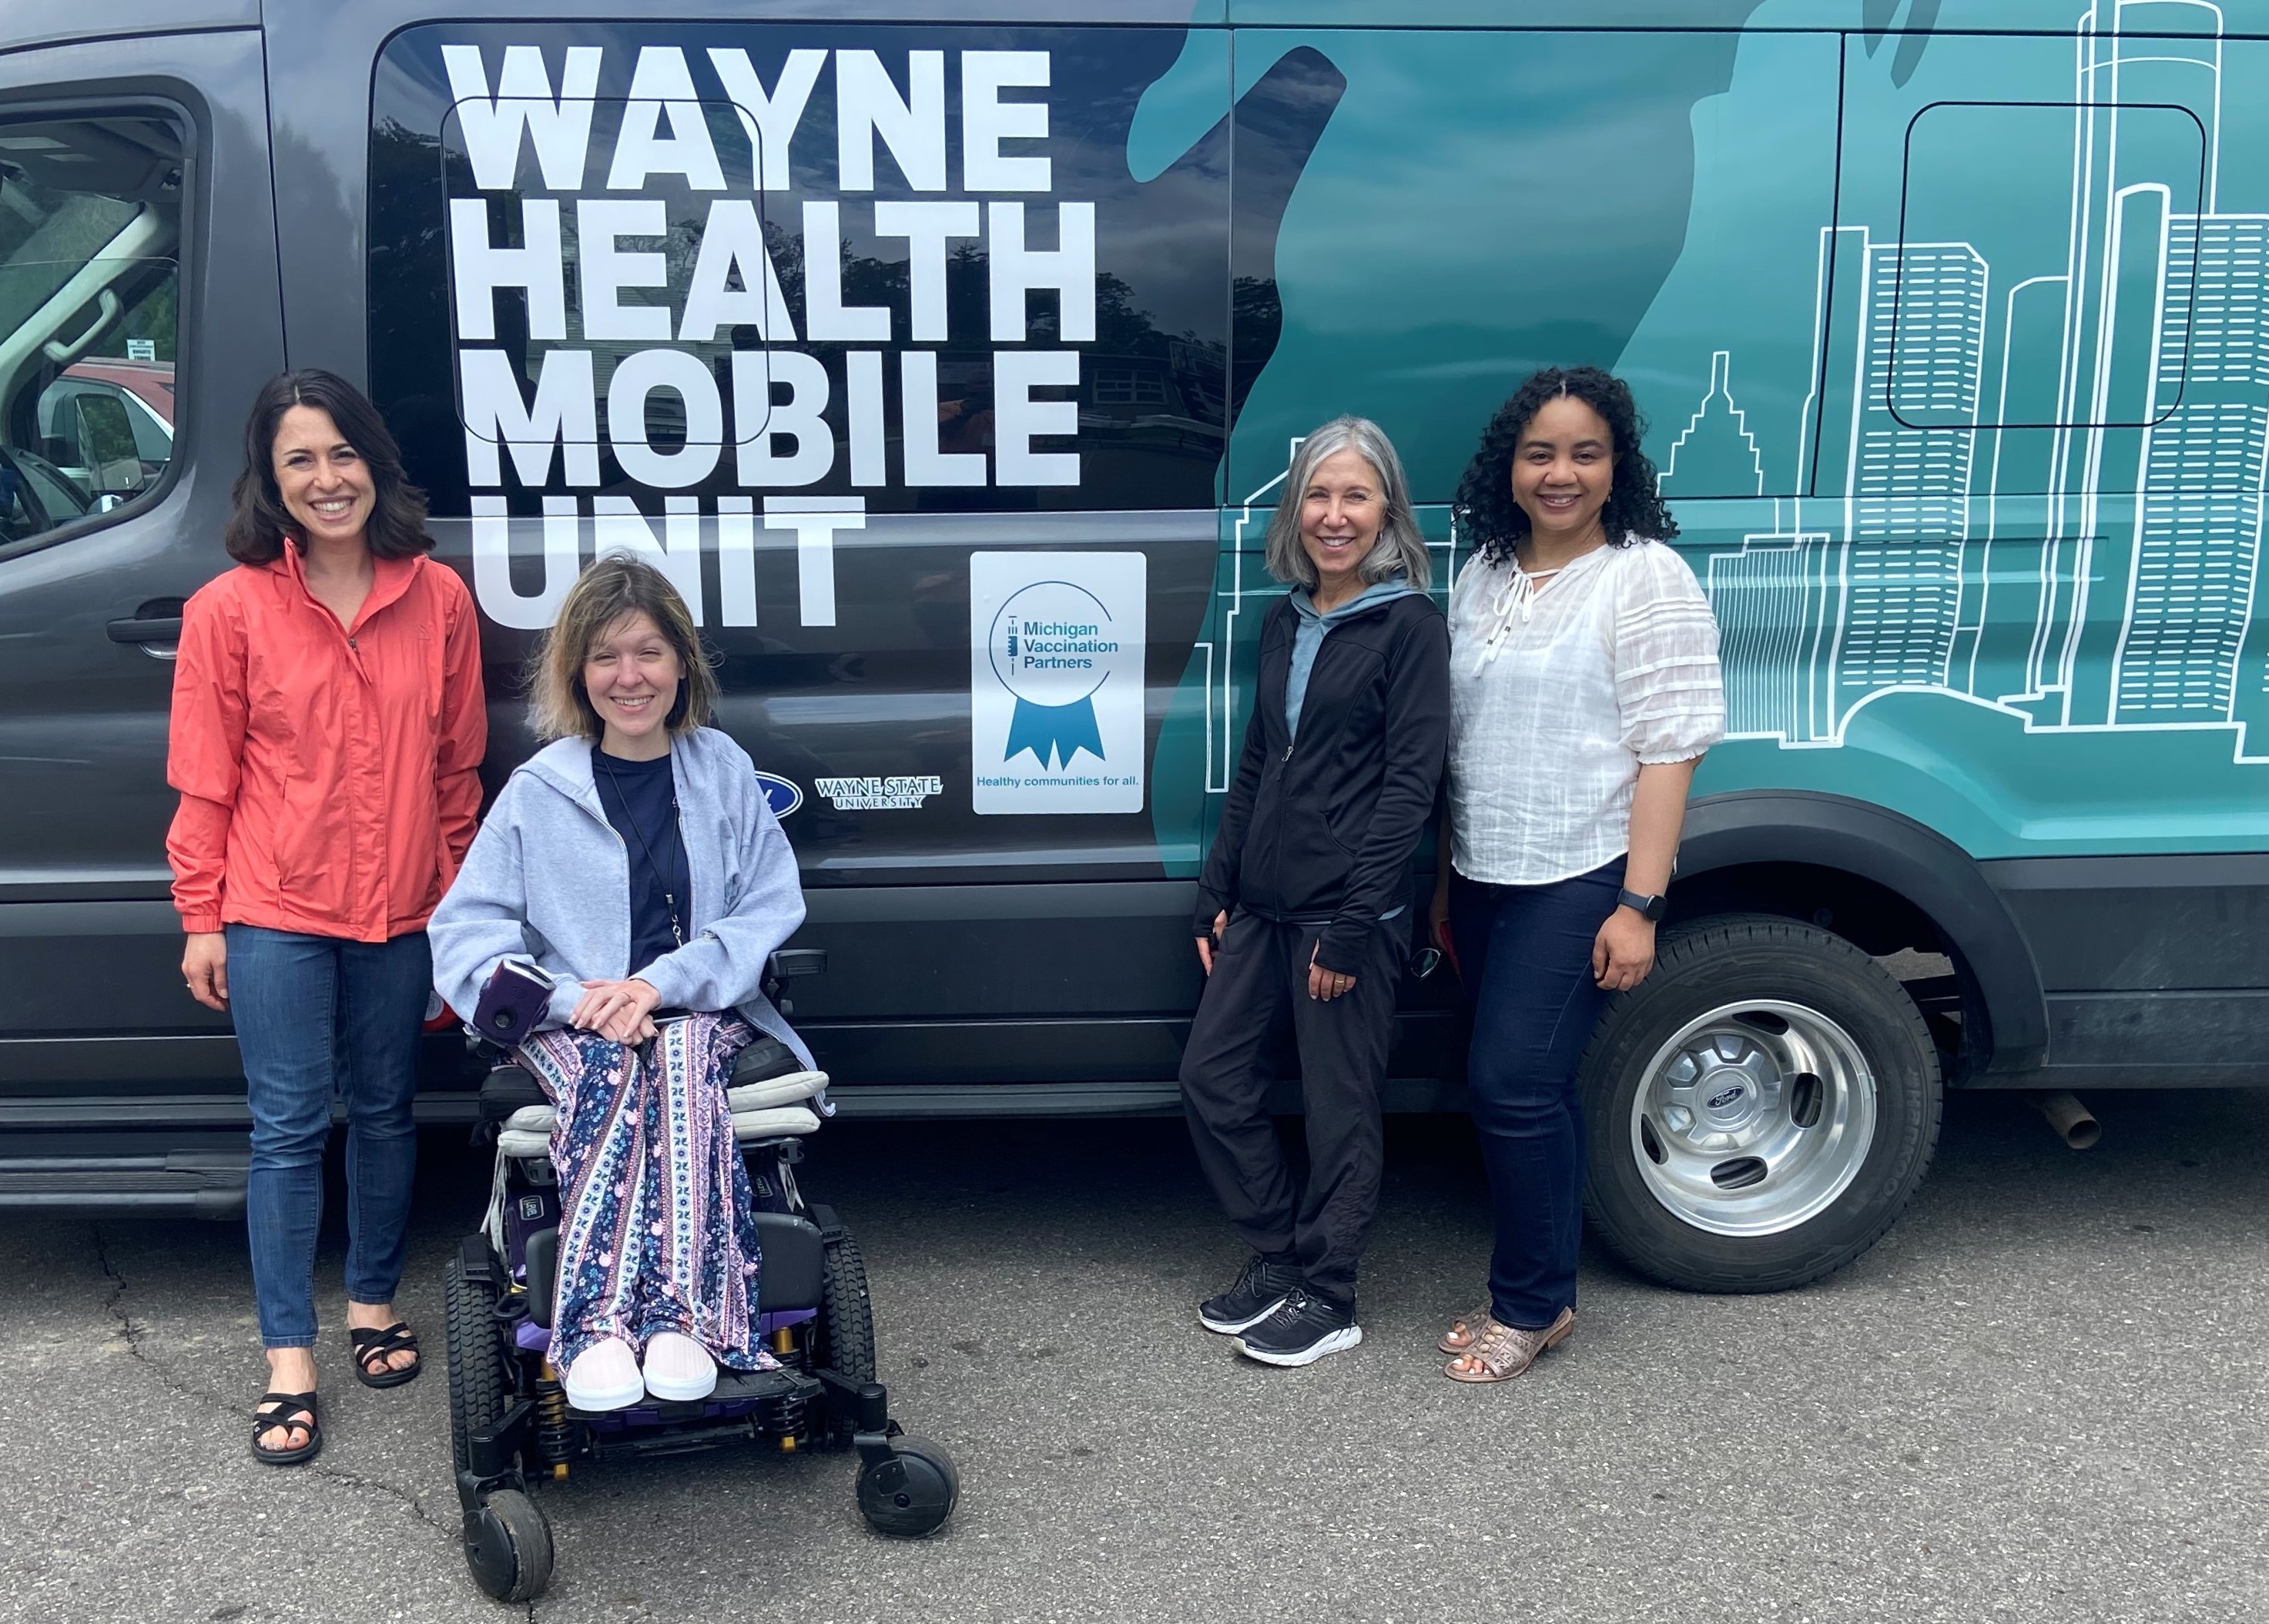 MVP project staff stand next to the Wayne Health Mobile Unit van. The MVP logo is on the van next to the group.